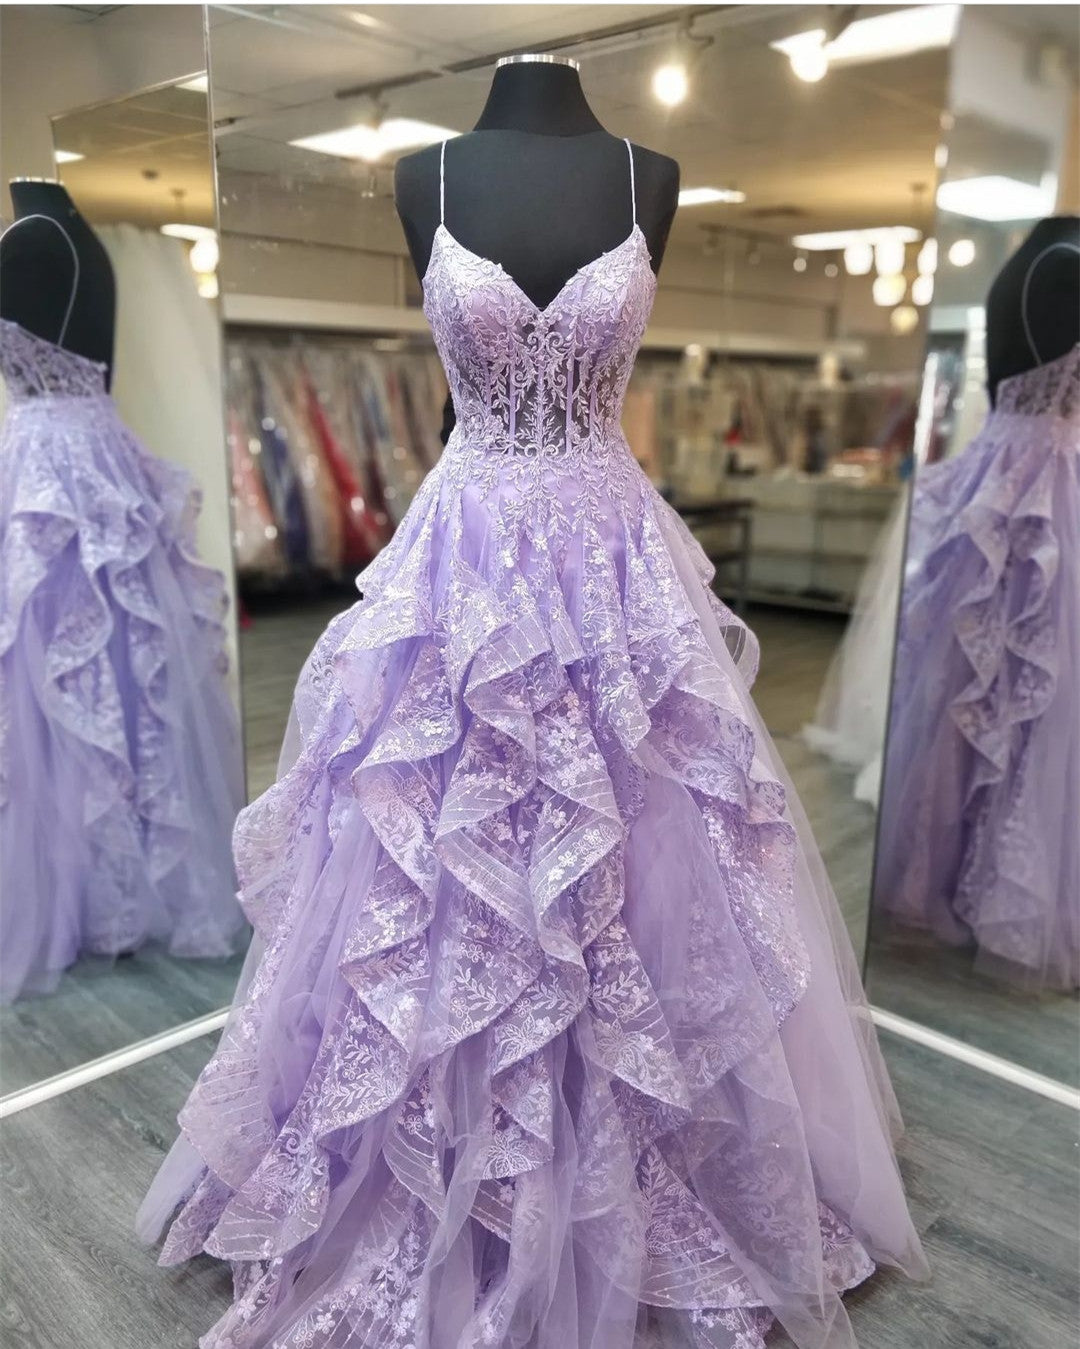 Spaghetti Staps Lilac Prom Dresses Evening Gowns with Sheer Bodice